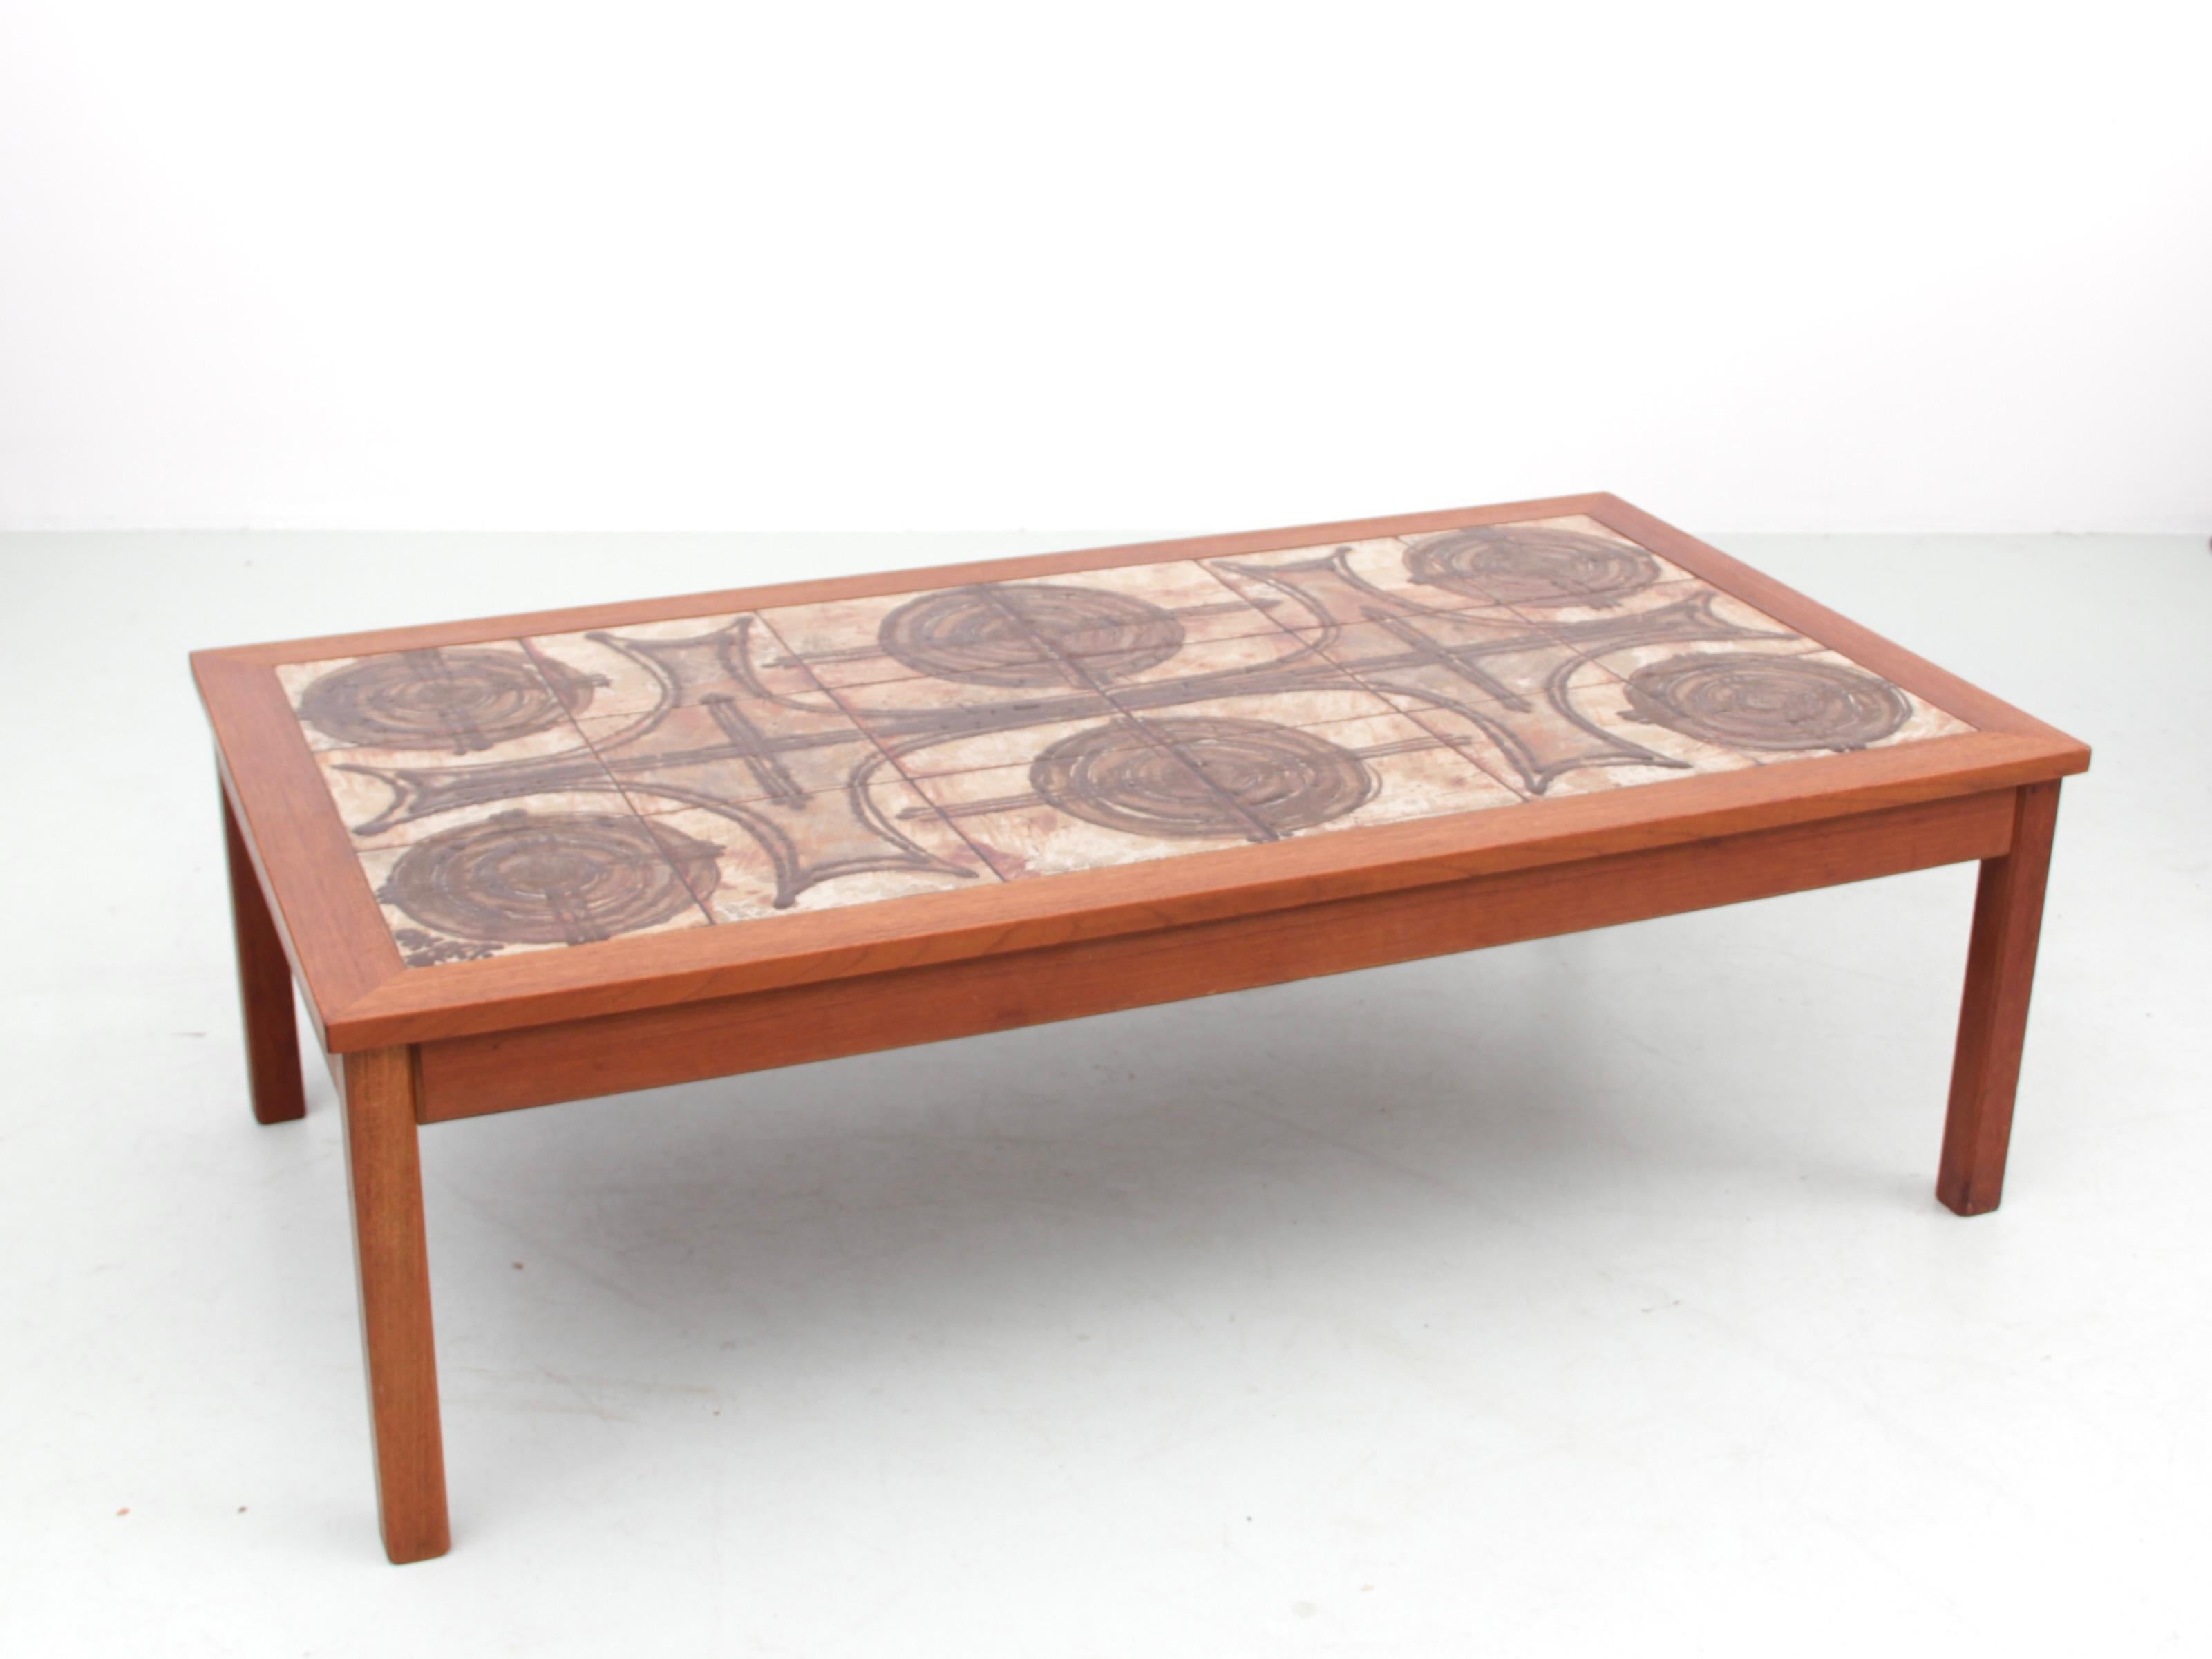 Mid century modern scandinavian coffe table with ceramic tiles, signed OxArt